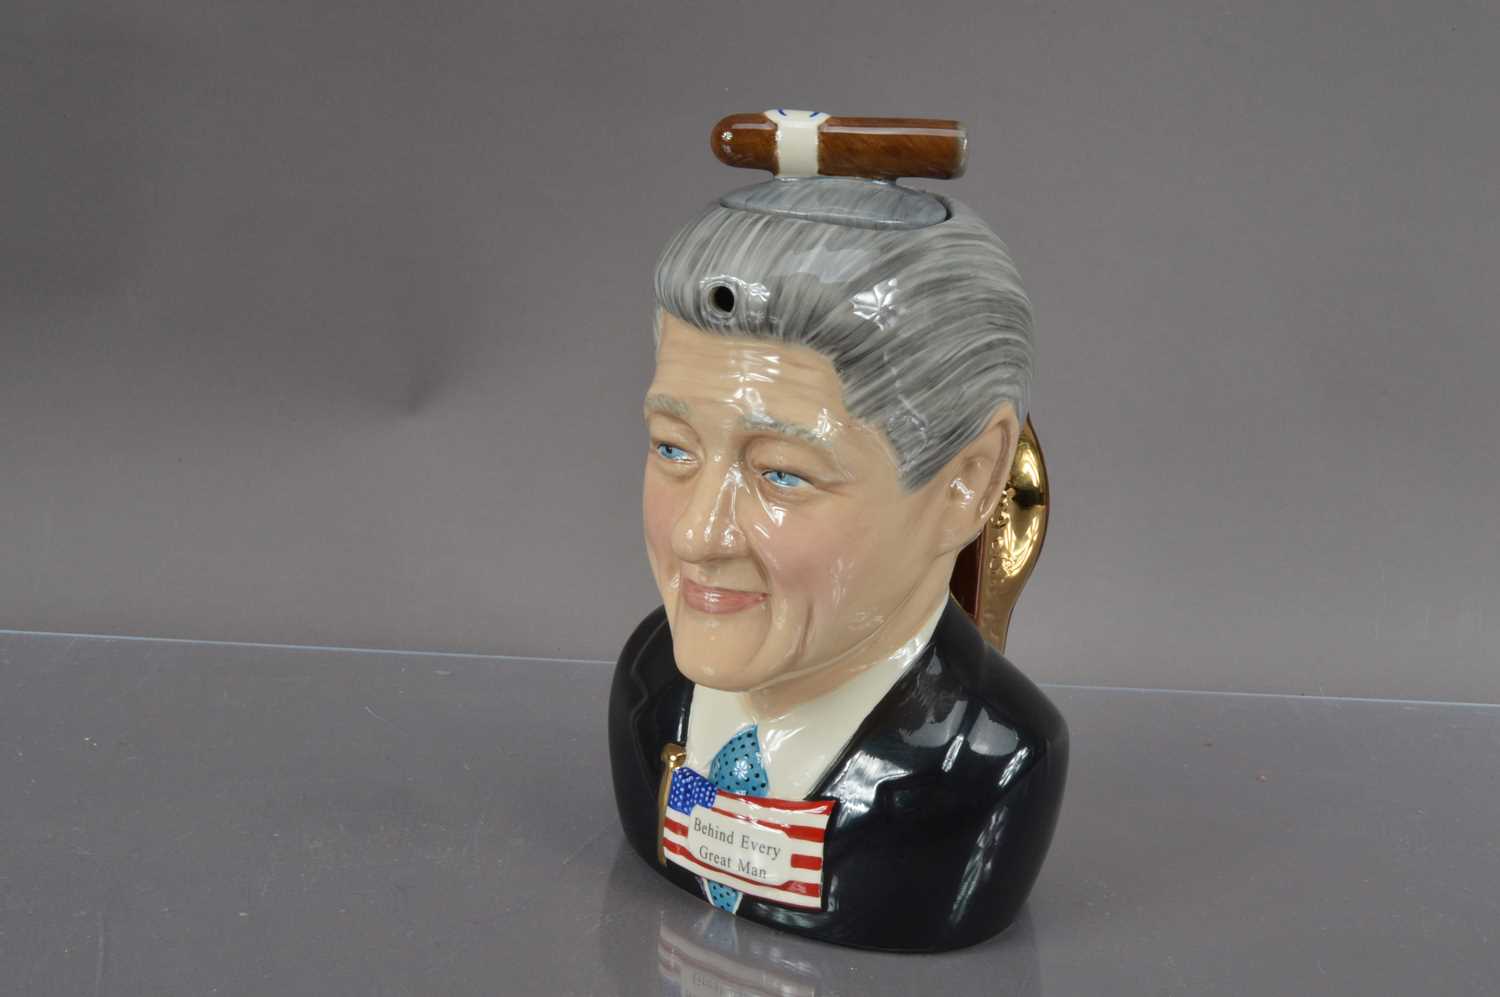 Lot 370 - A novelty "LIARBILLYTEA" ("Bill Clinton") teapot designed by Vince McDonald for 'Totally Teapots'